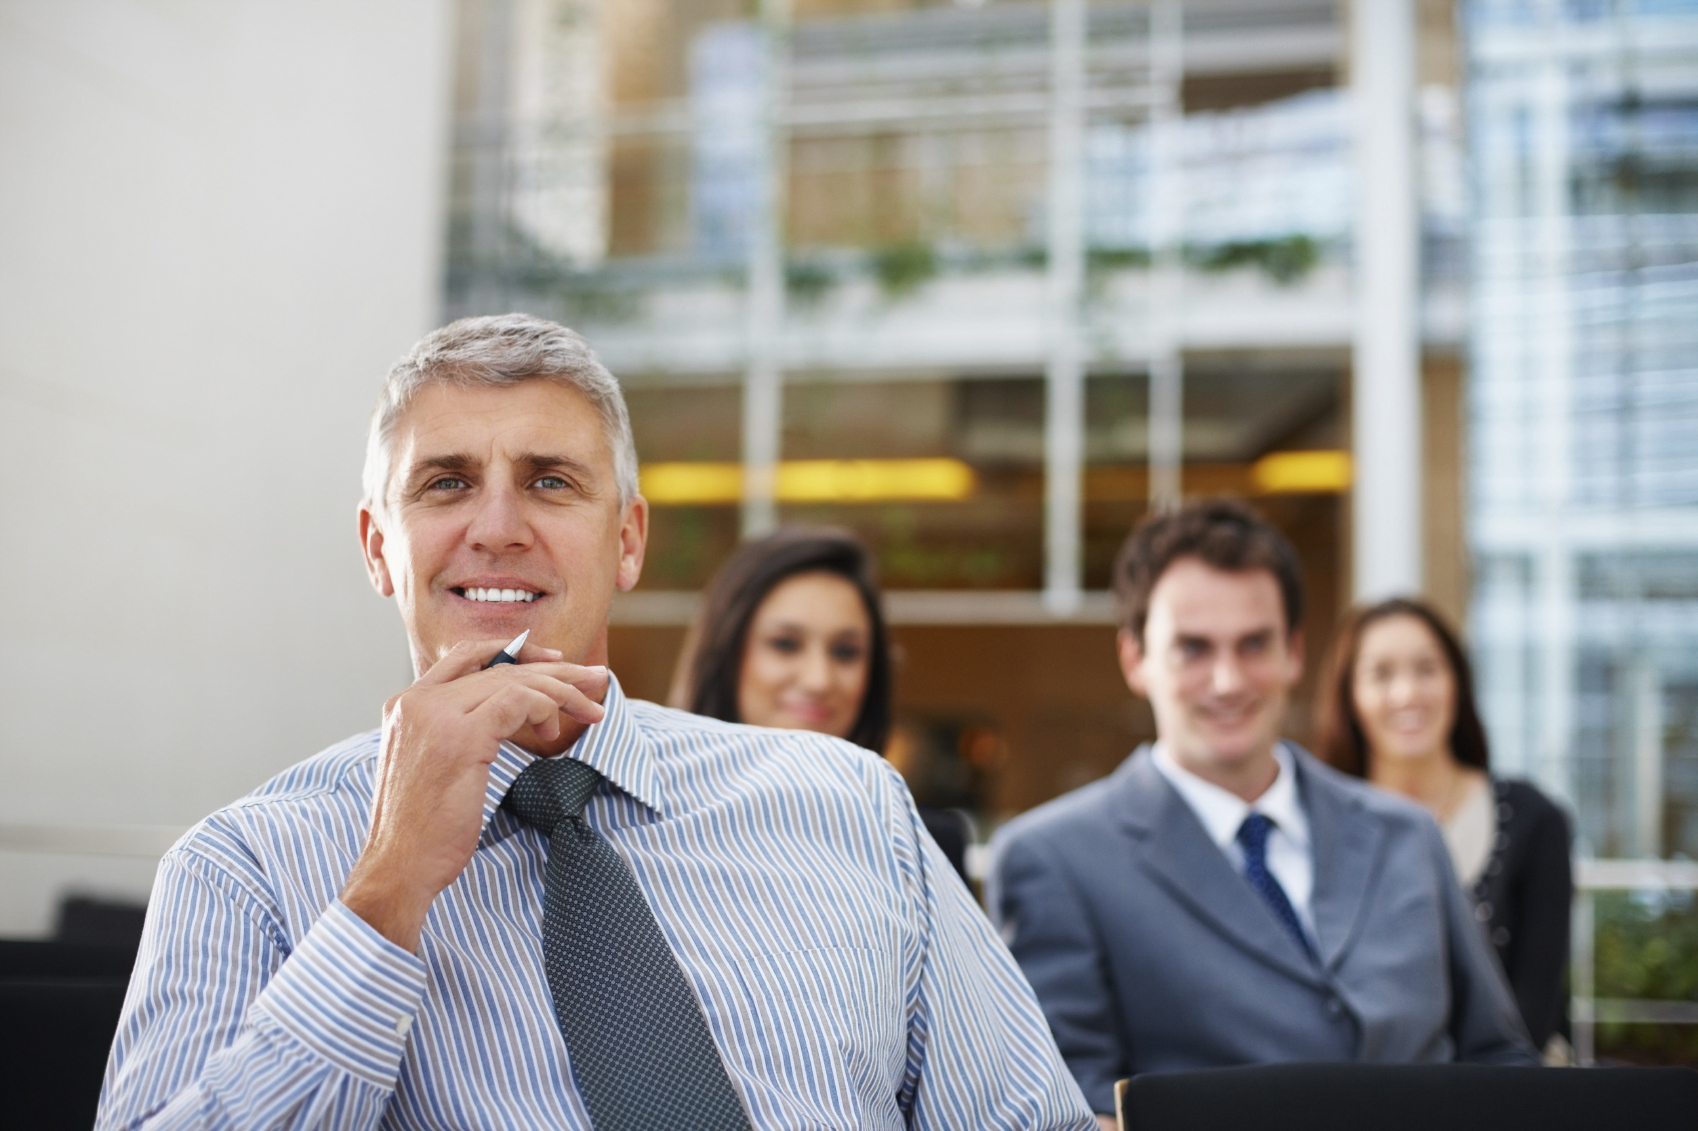 Mature business man attending presentation with team in blur background